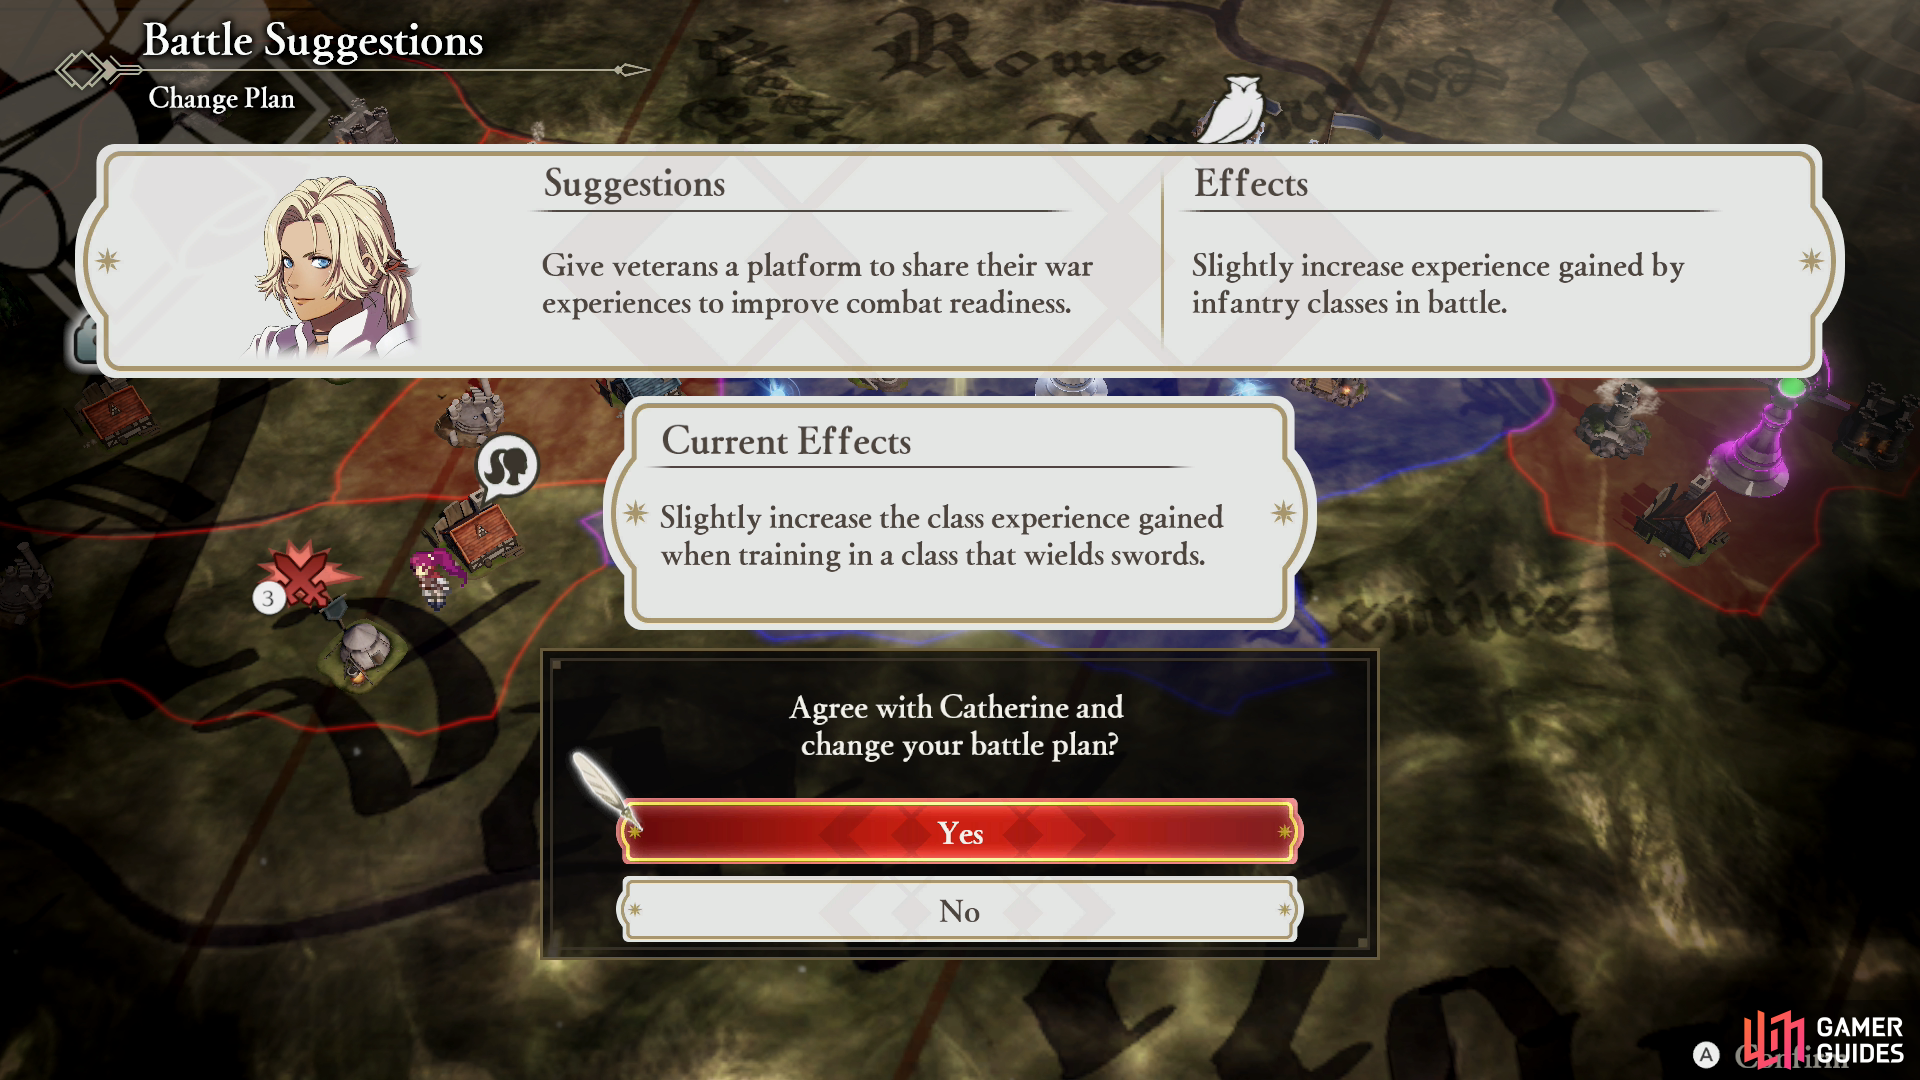 Characters can suggest new Battle Suggestions after completing Side Quest battles on the War Map. This will overwrite the previous Battle Suggestion and earn the character who recommended the new suggestion Morale and Support Points.